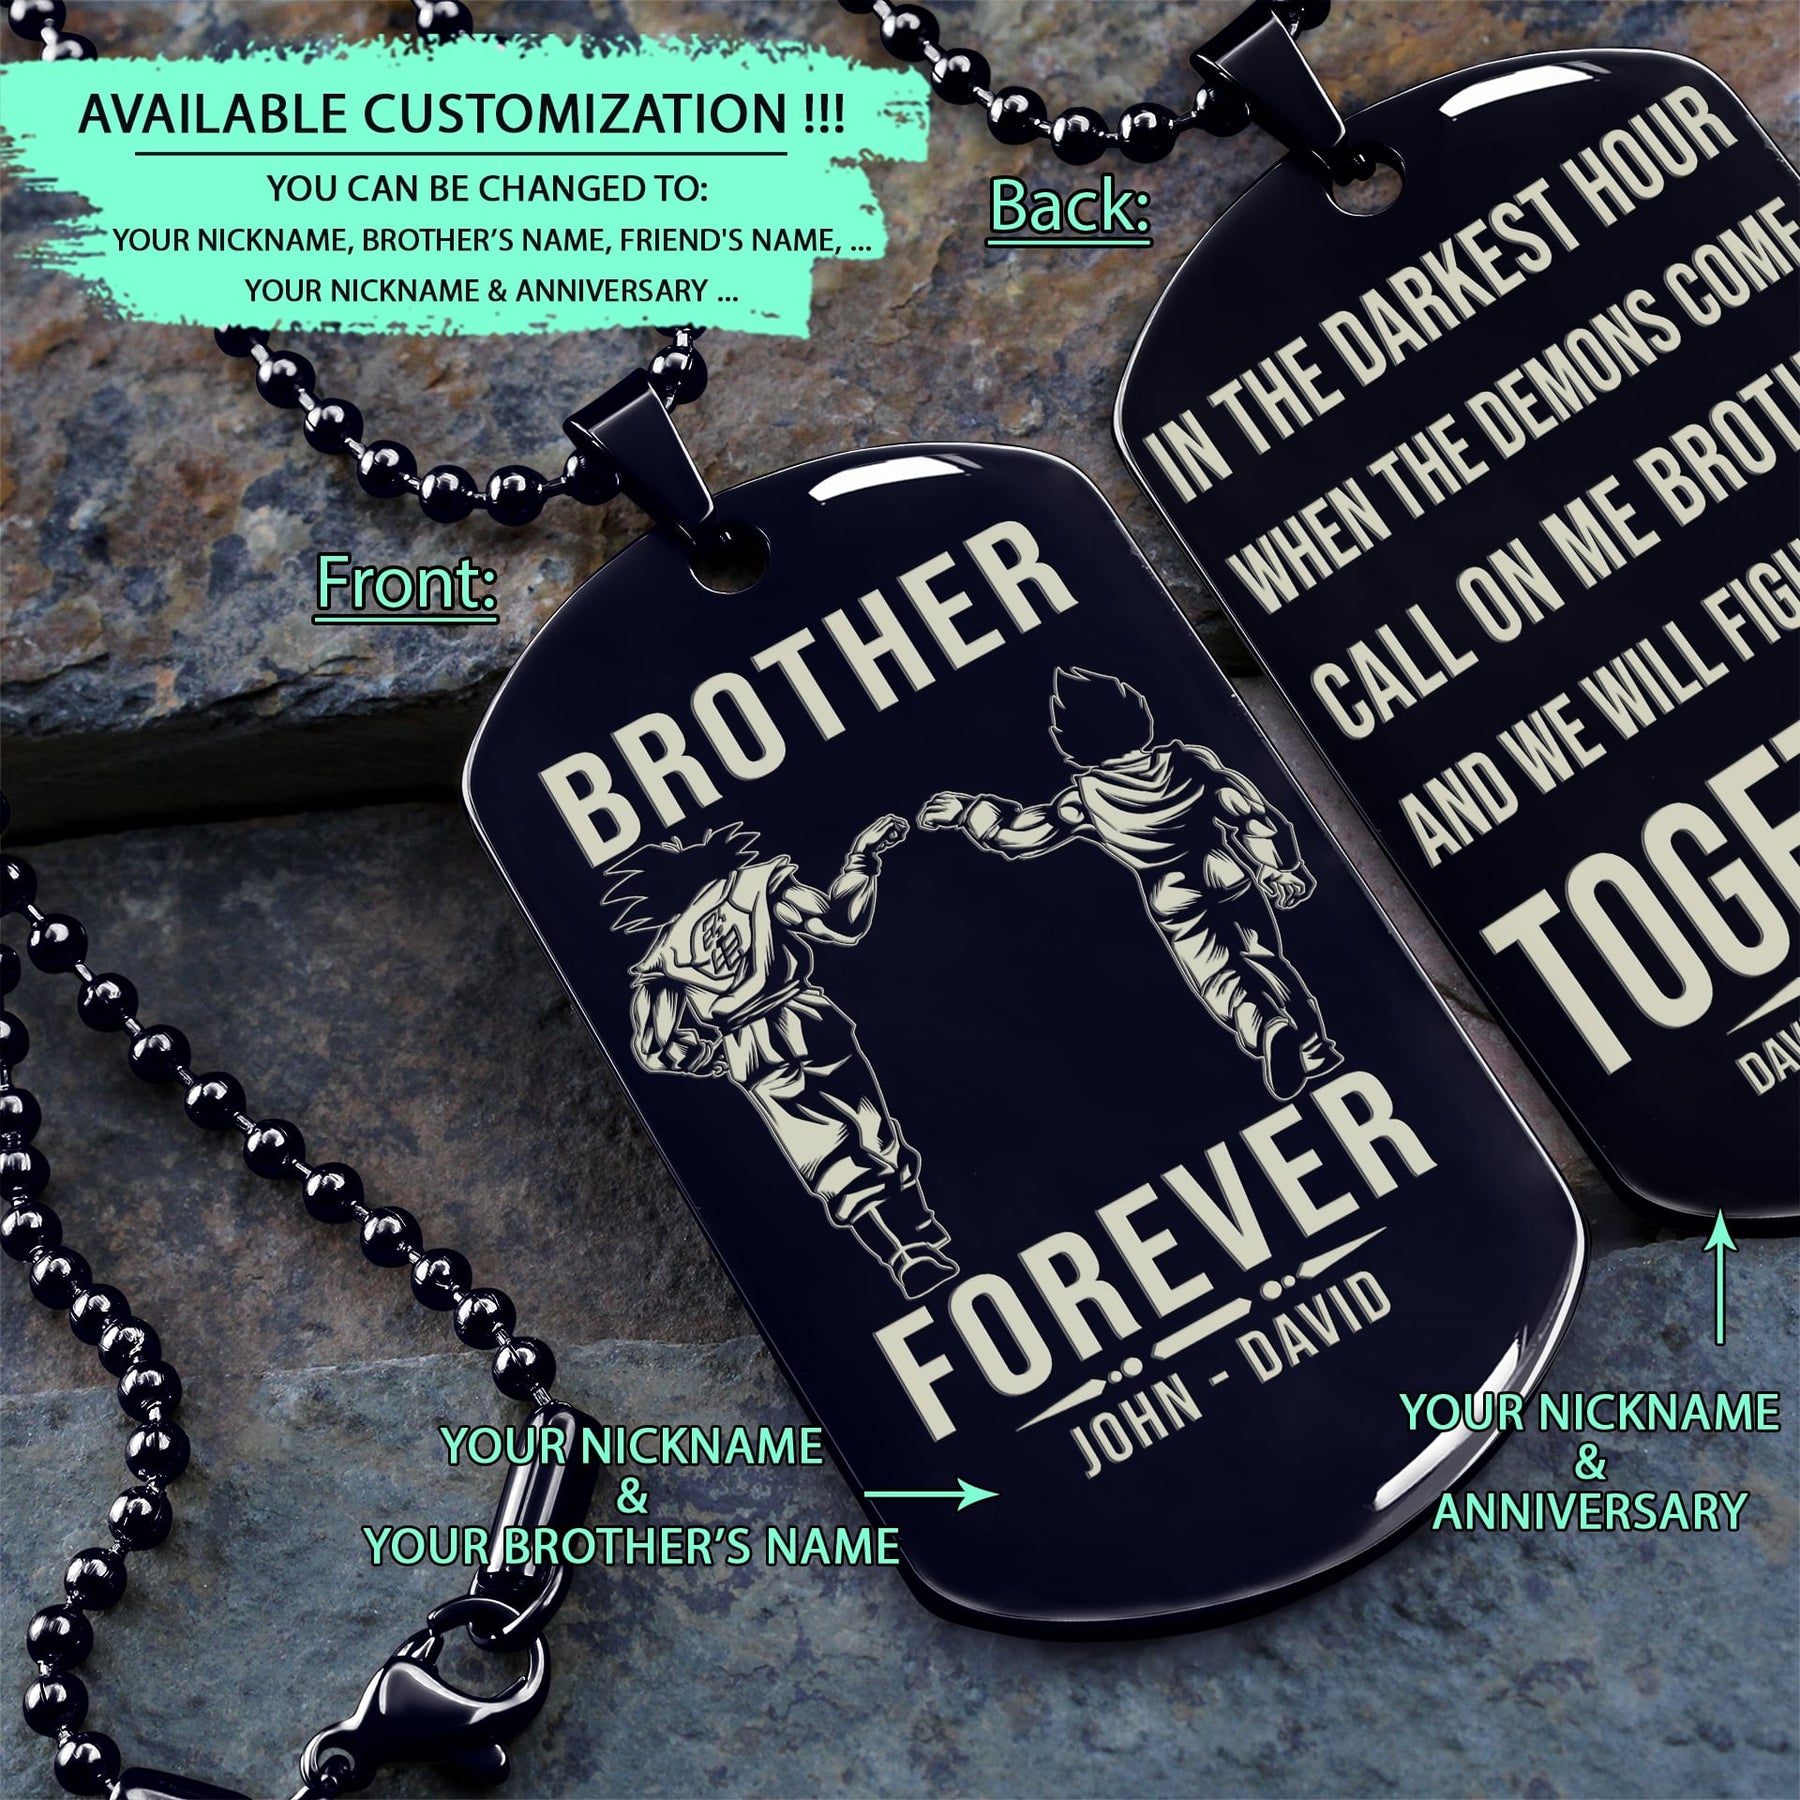 DRD039 - Brother Forever - Call On Me Brother - Goku - Vegeta - Dragon Ball Dog Tag - Double Side Engrave Black Dog Tag